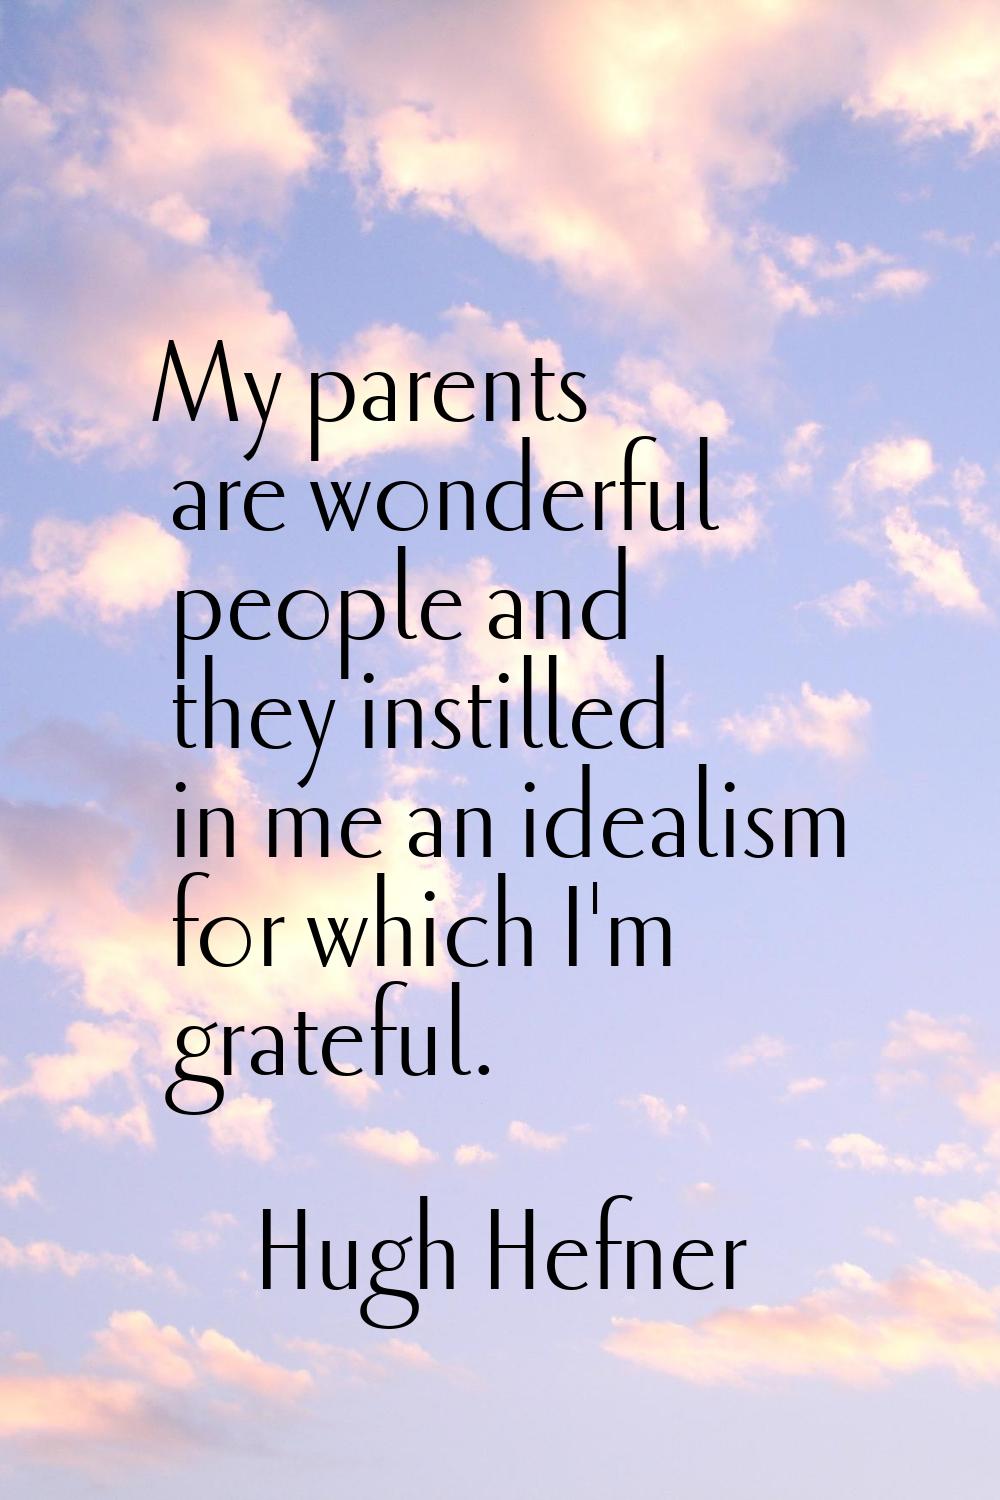 My parents are wonderful people and they instilled in me an idealism for which I'm grateful.